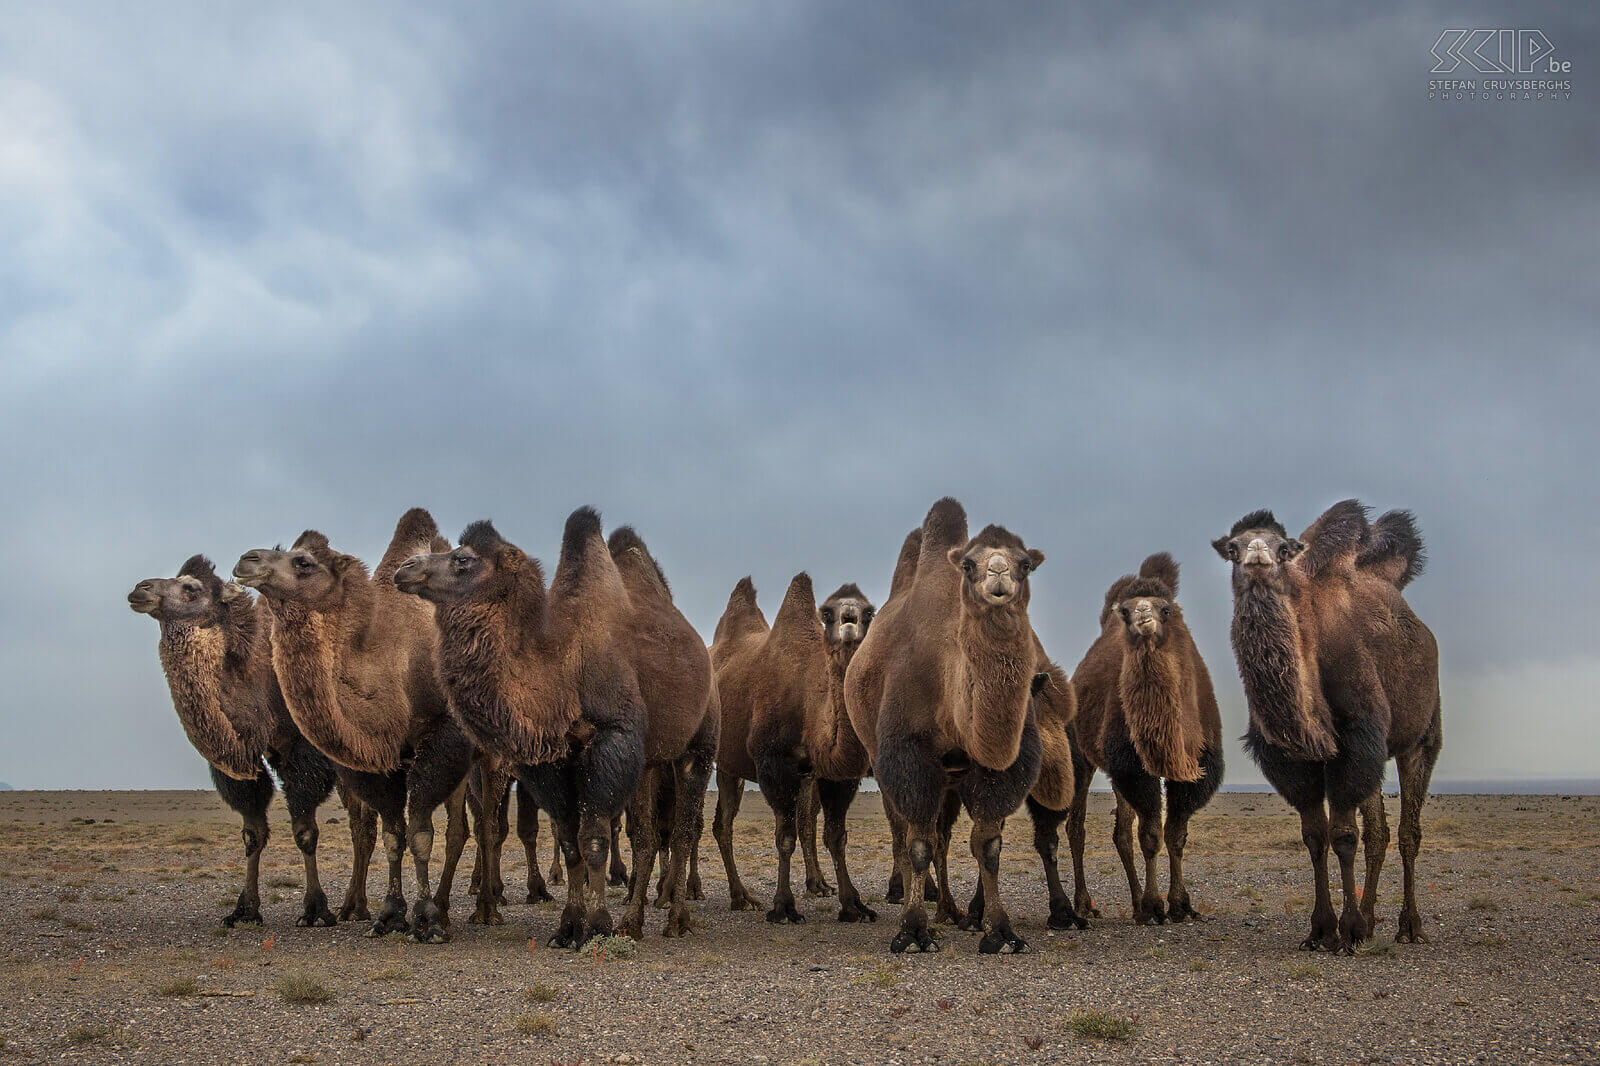 Gobi - Camels We traveled further south to the Gobi desert and soon we saw the first herds of Bactrian camels (Camelus bactrianus) which are herded by the nomads. Stefan Cruysberghs